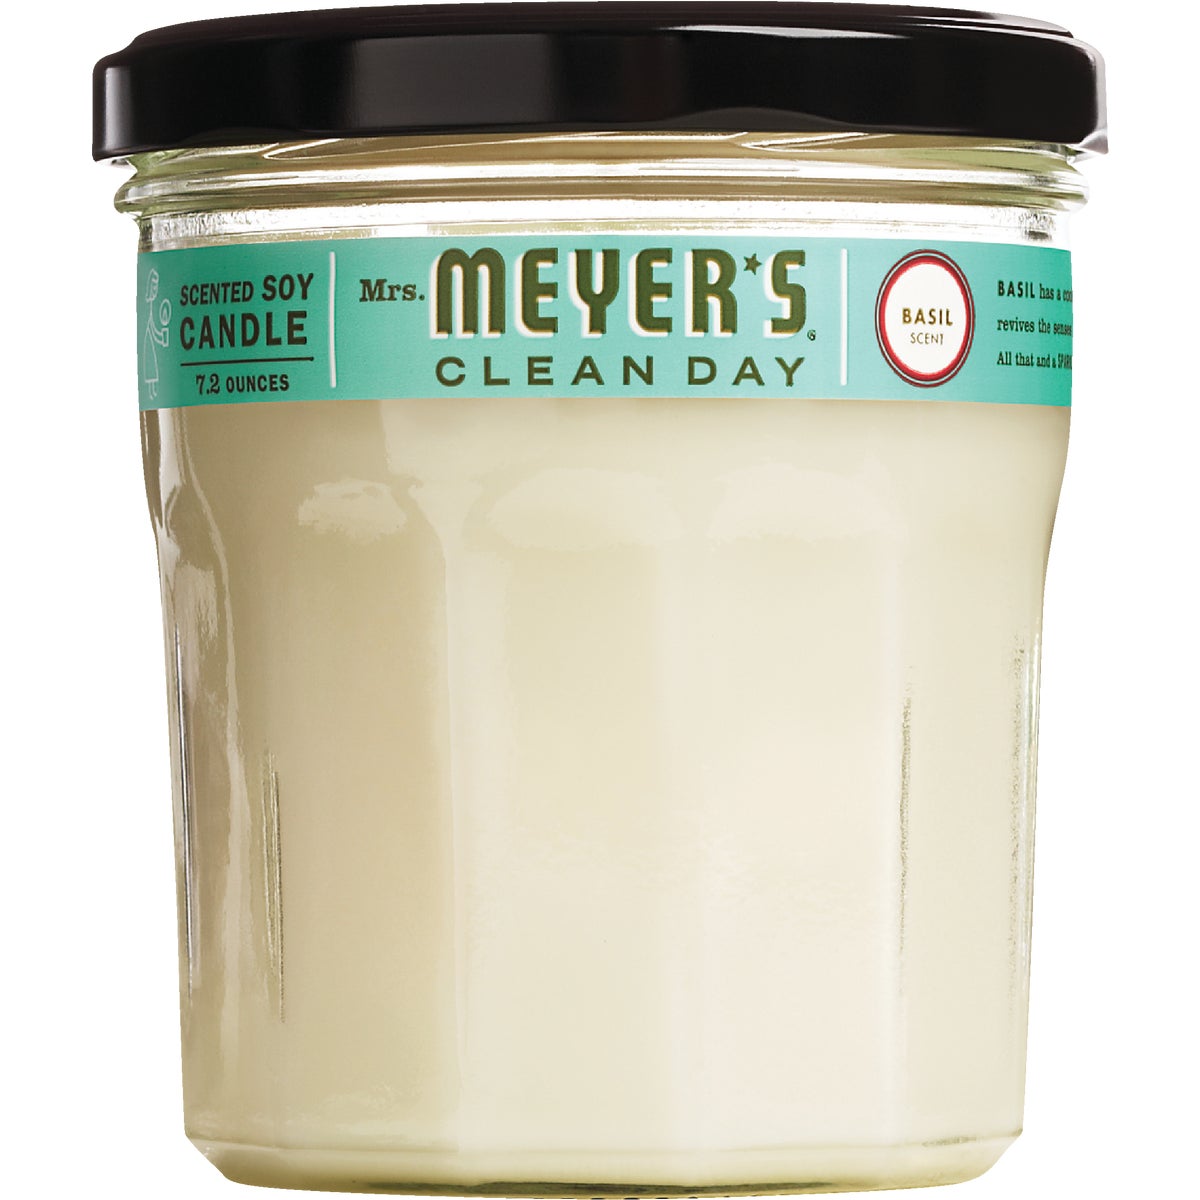 Mrs. Meyer's Clean Day 7.2 Oz. Basil Large Soy Candle